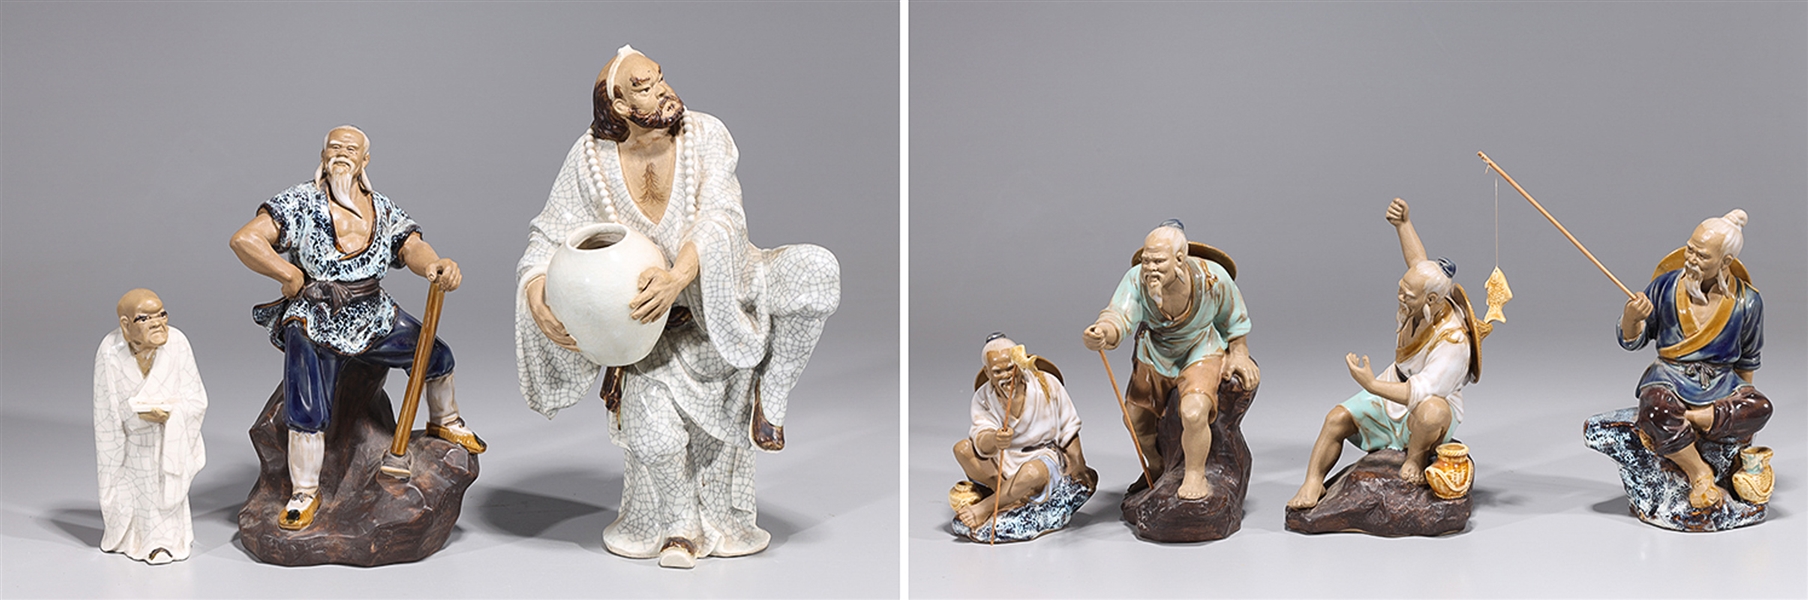 Group of Chinese porcelain figures 2ad03e